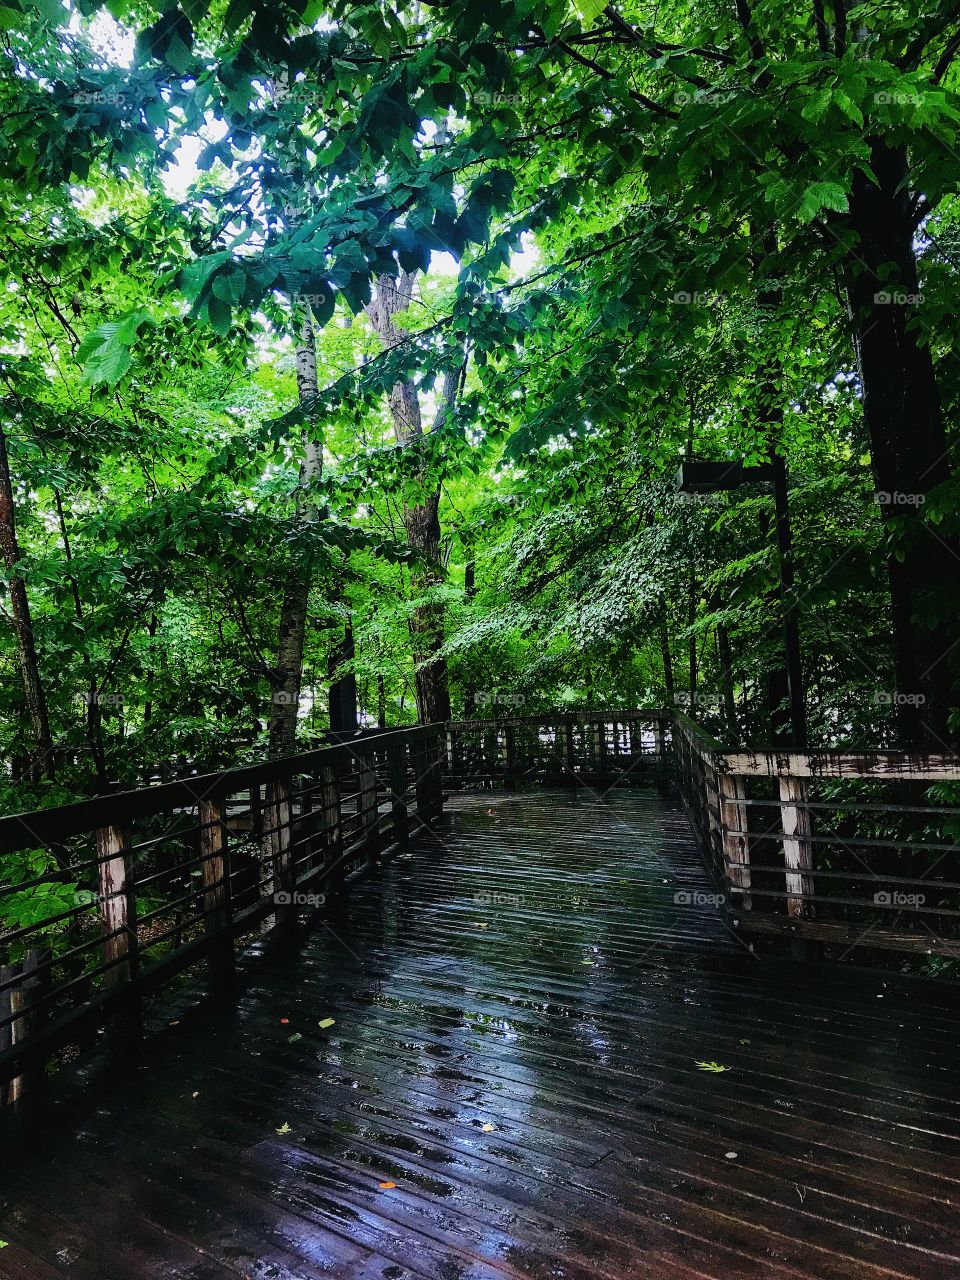 Bridge in a forest on a rainy day—taken in Ludington, Michigan 